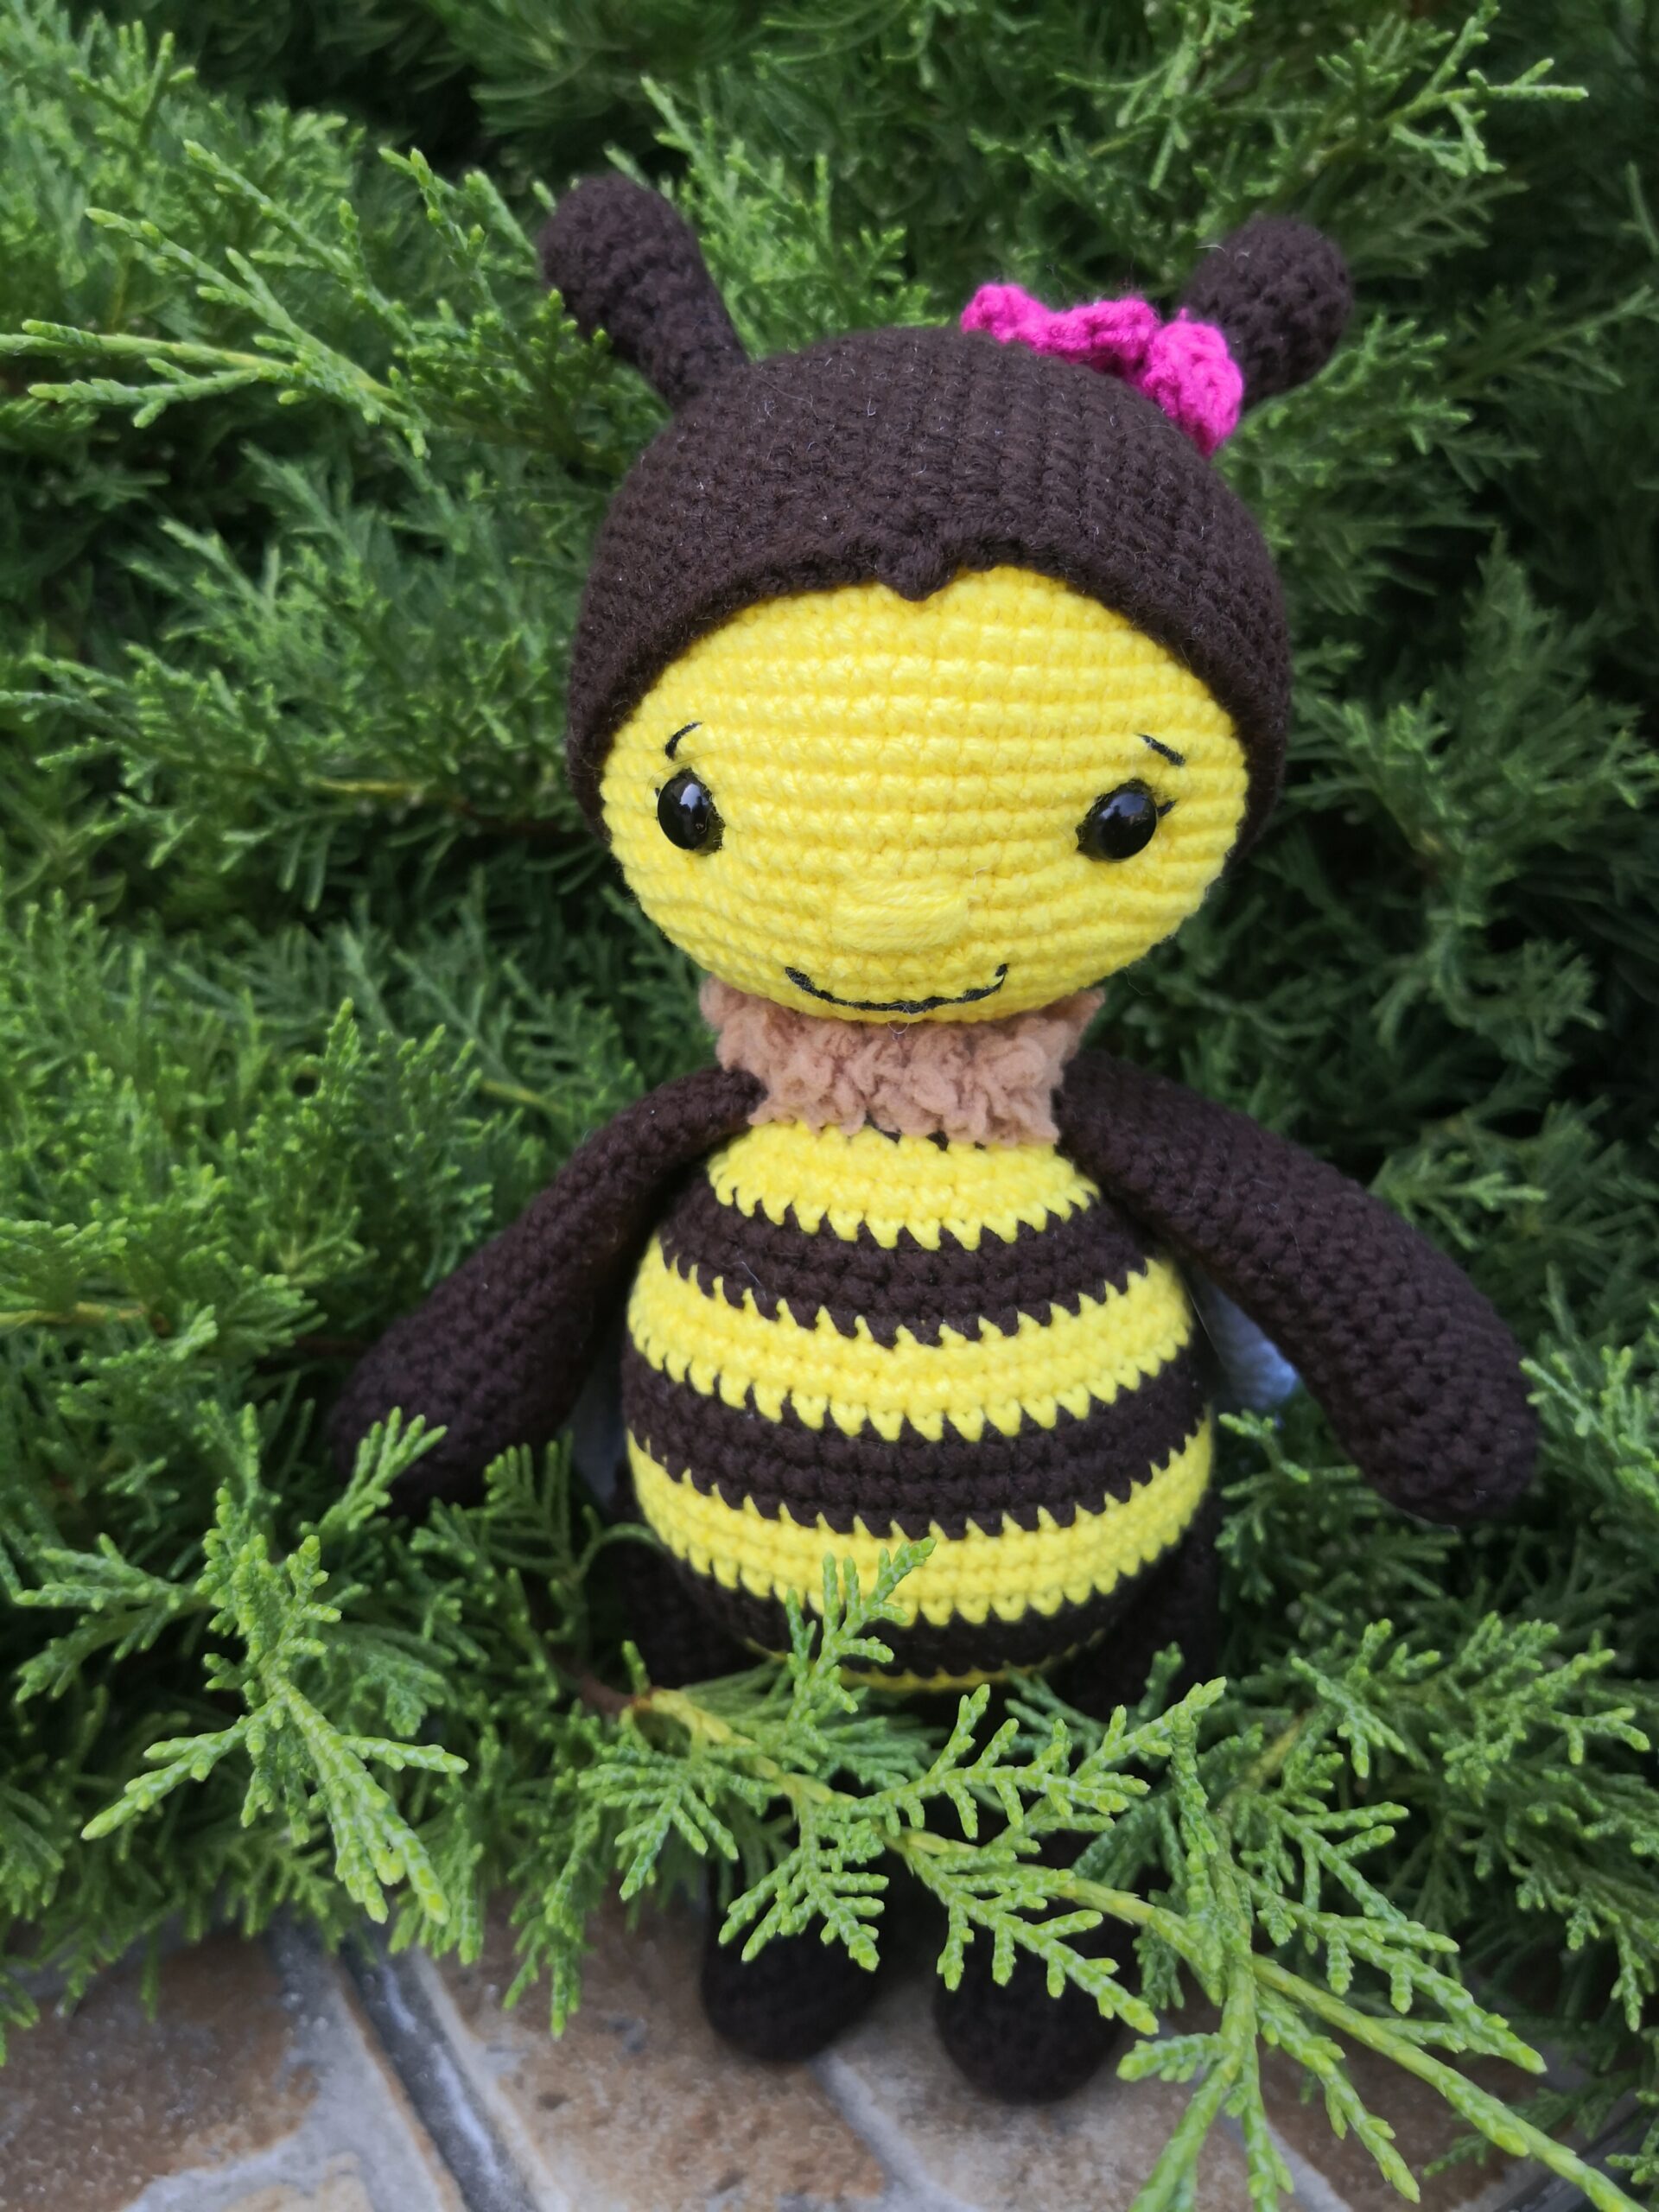 Handmade crocheted bee with pink flower on its head.